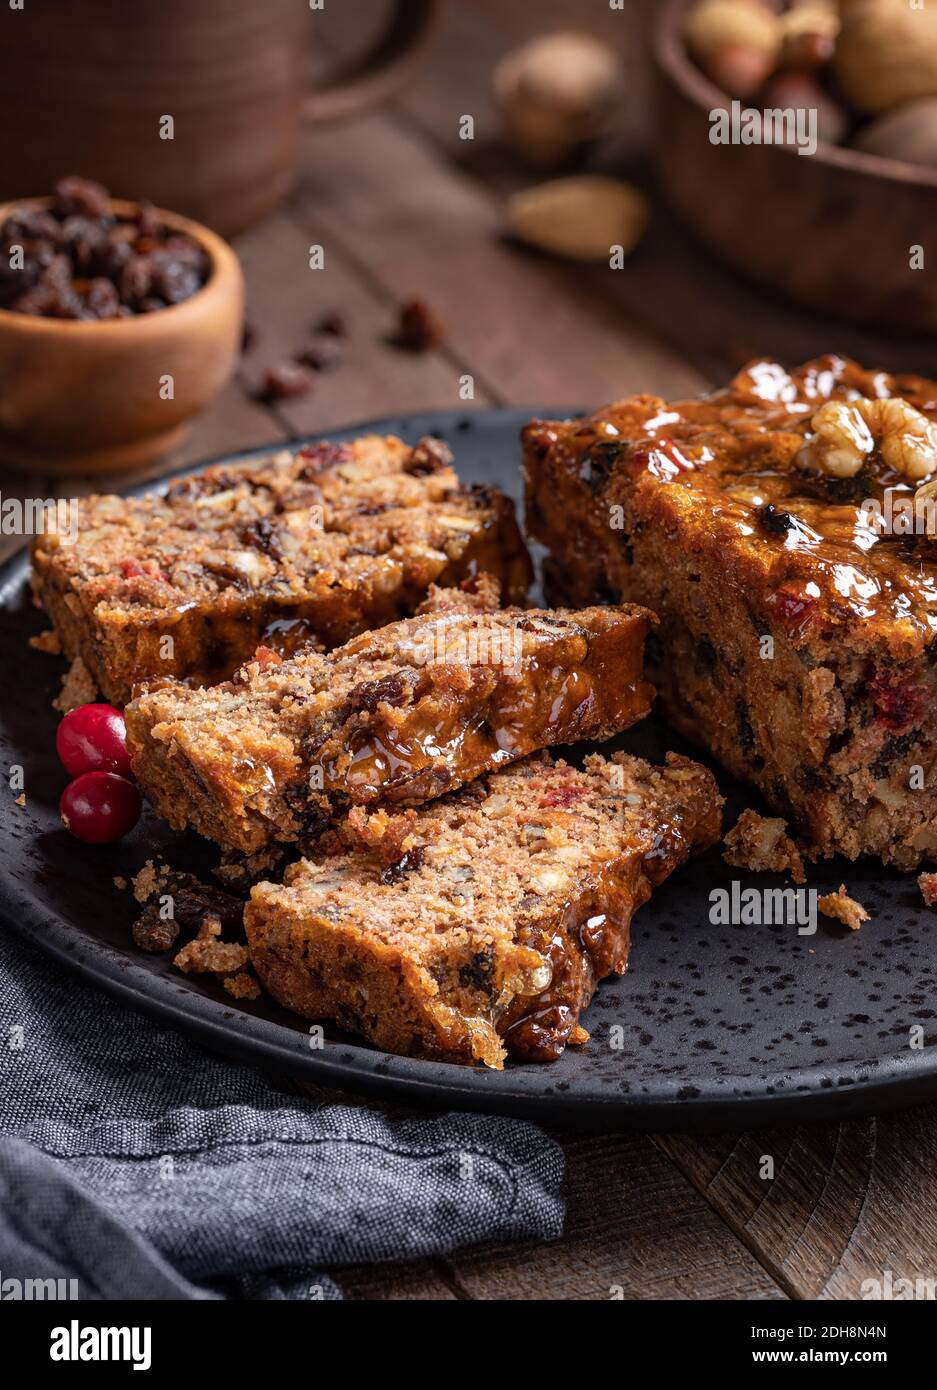 Fruitcake loaf sliced on a plate with raisins and nuts in background on a rustic wooden table Stock Photo